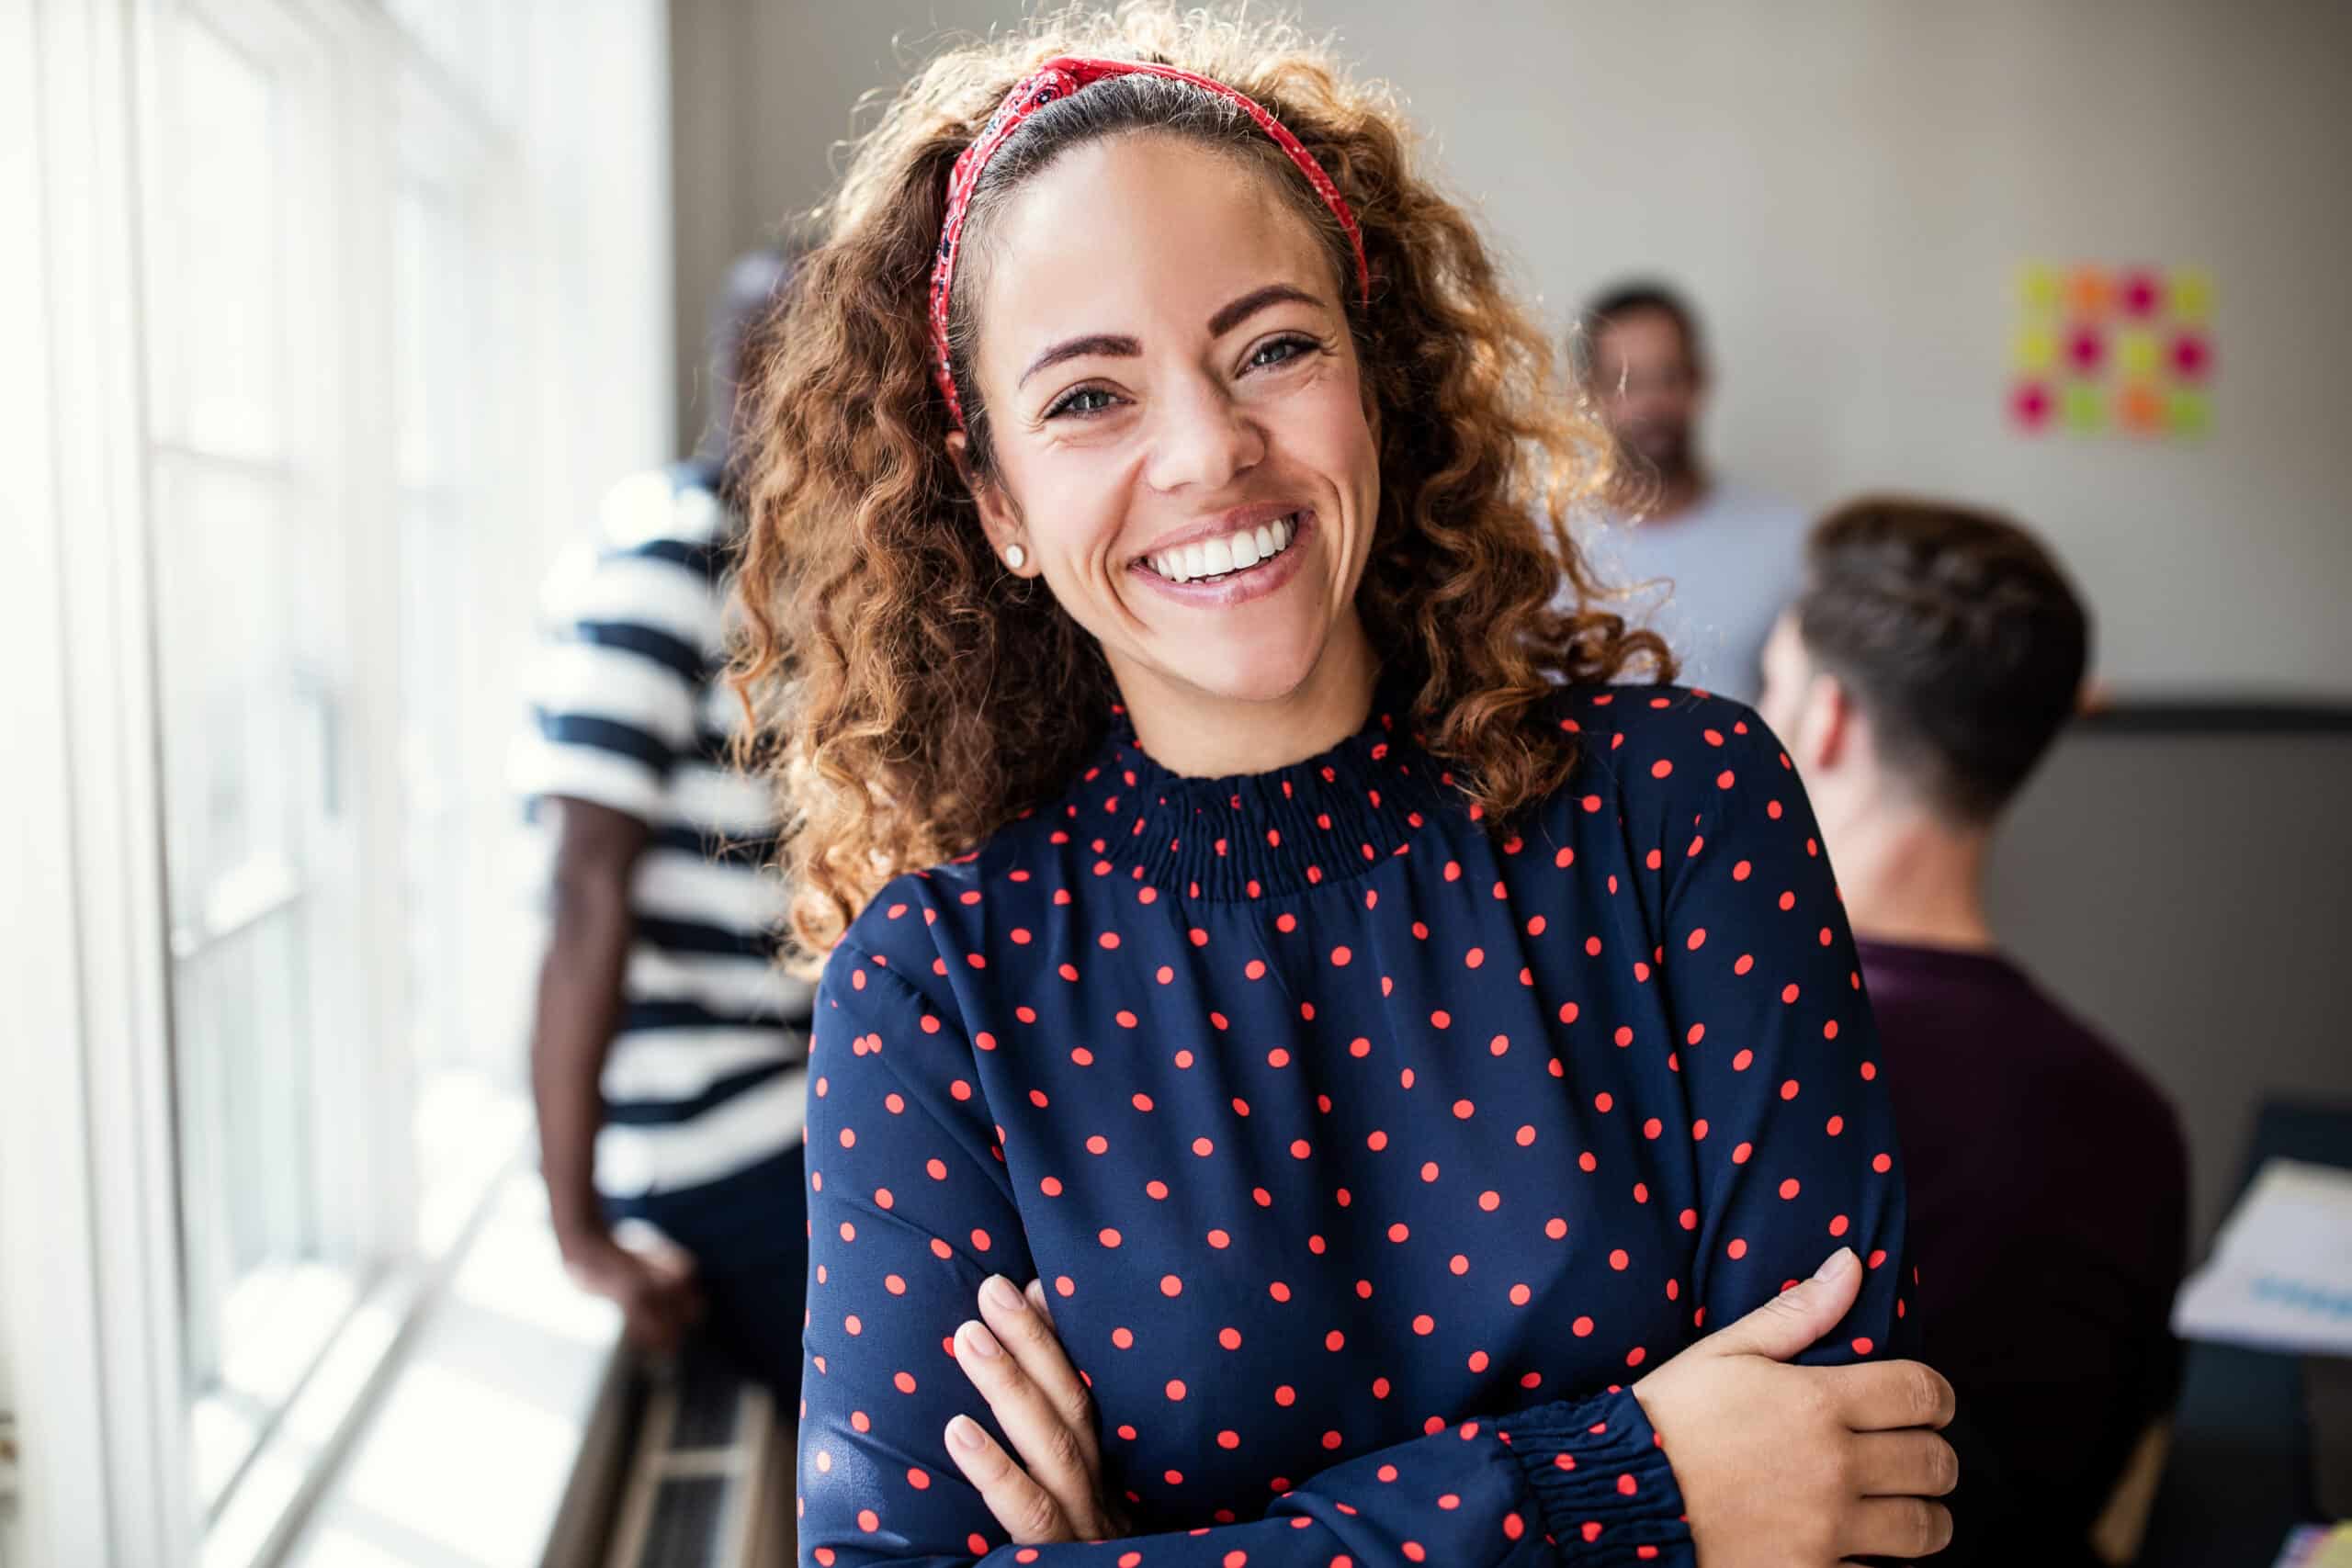 girl with polka dot shirt and curly hair smiling